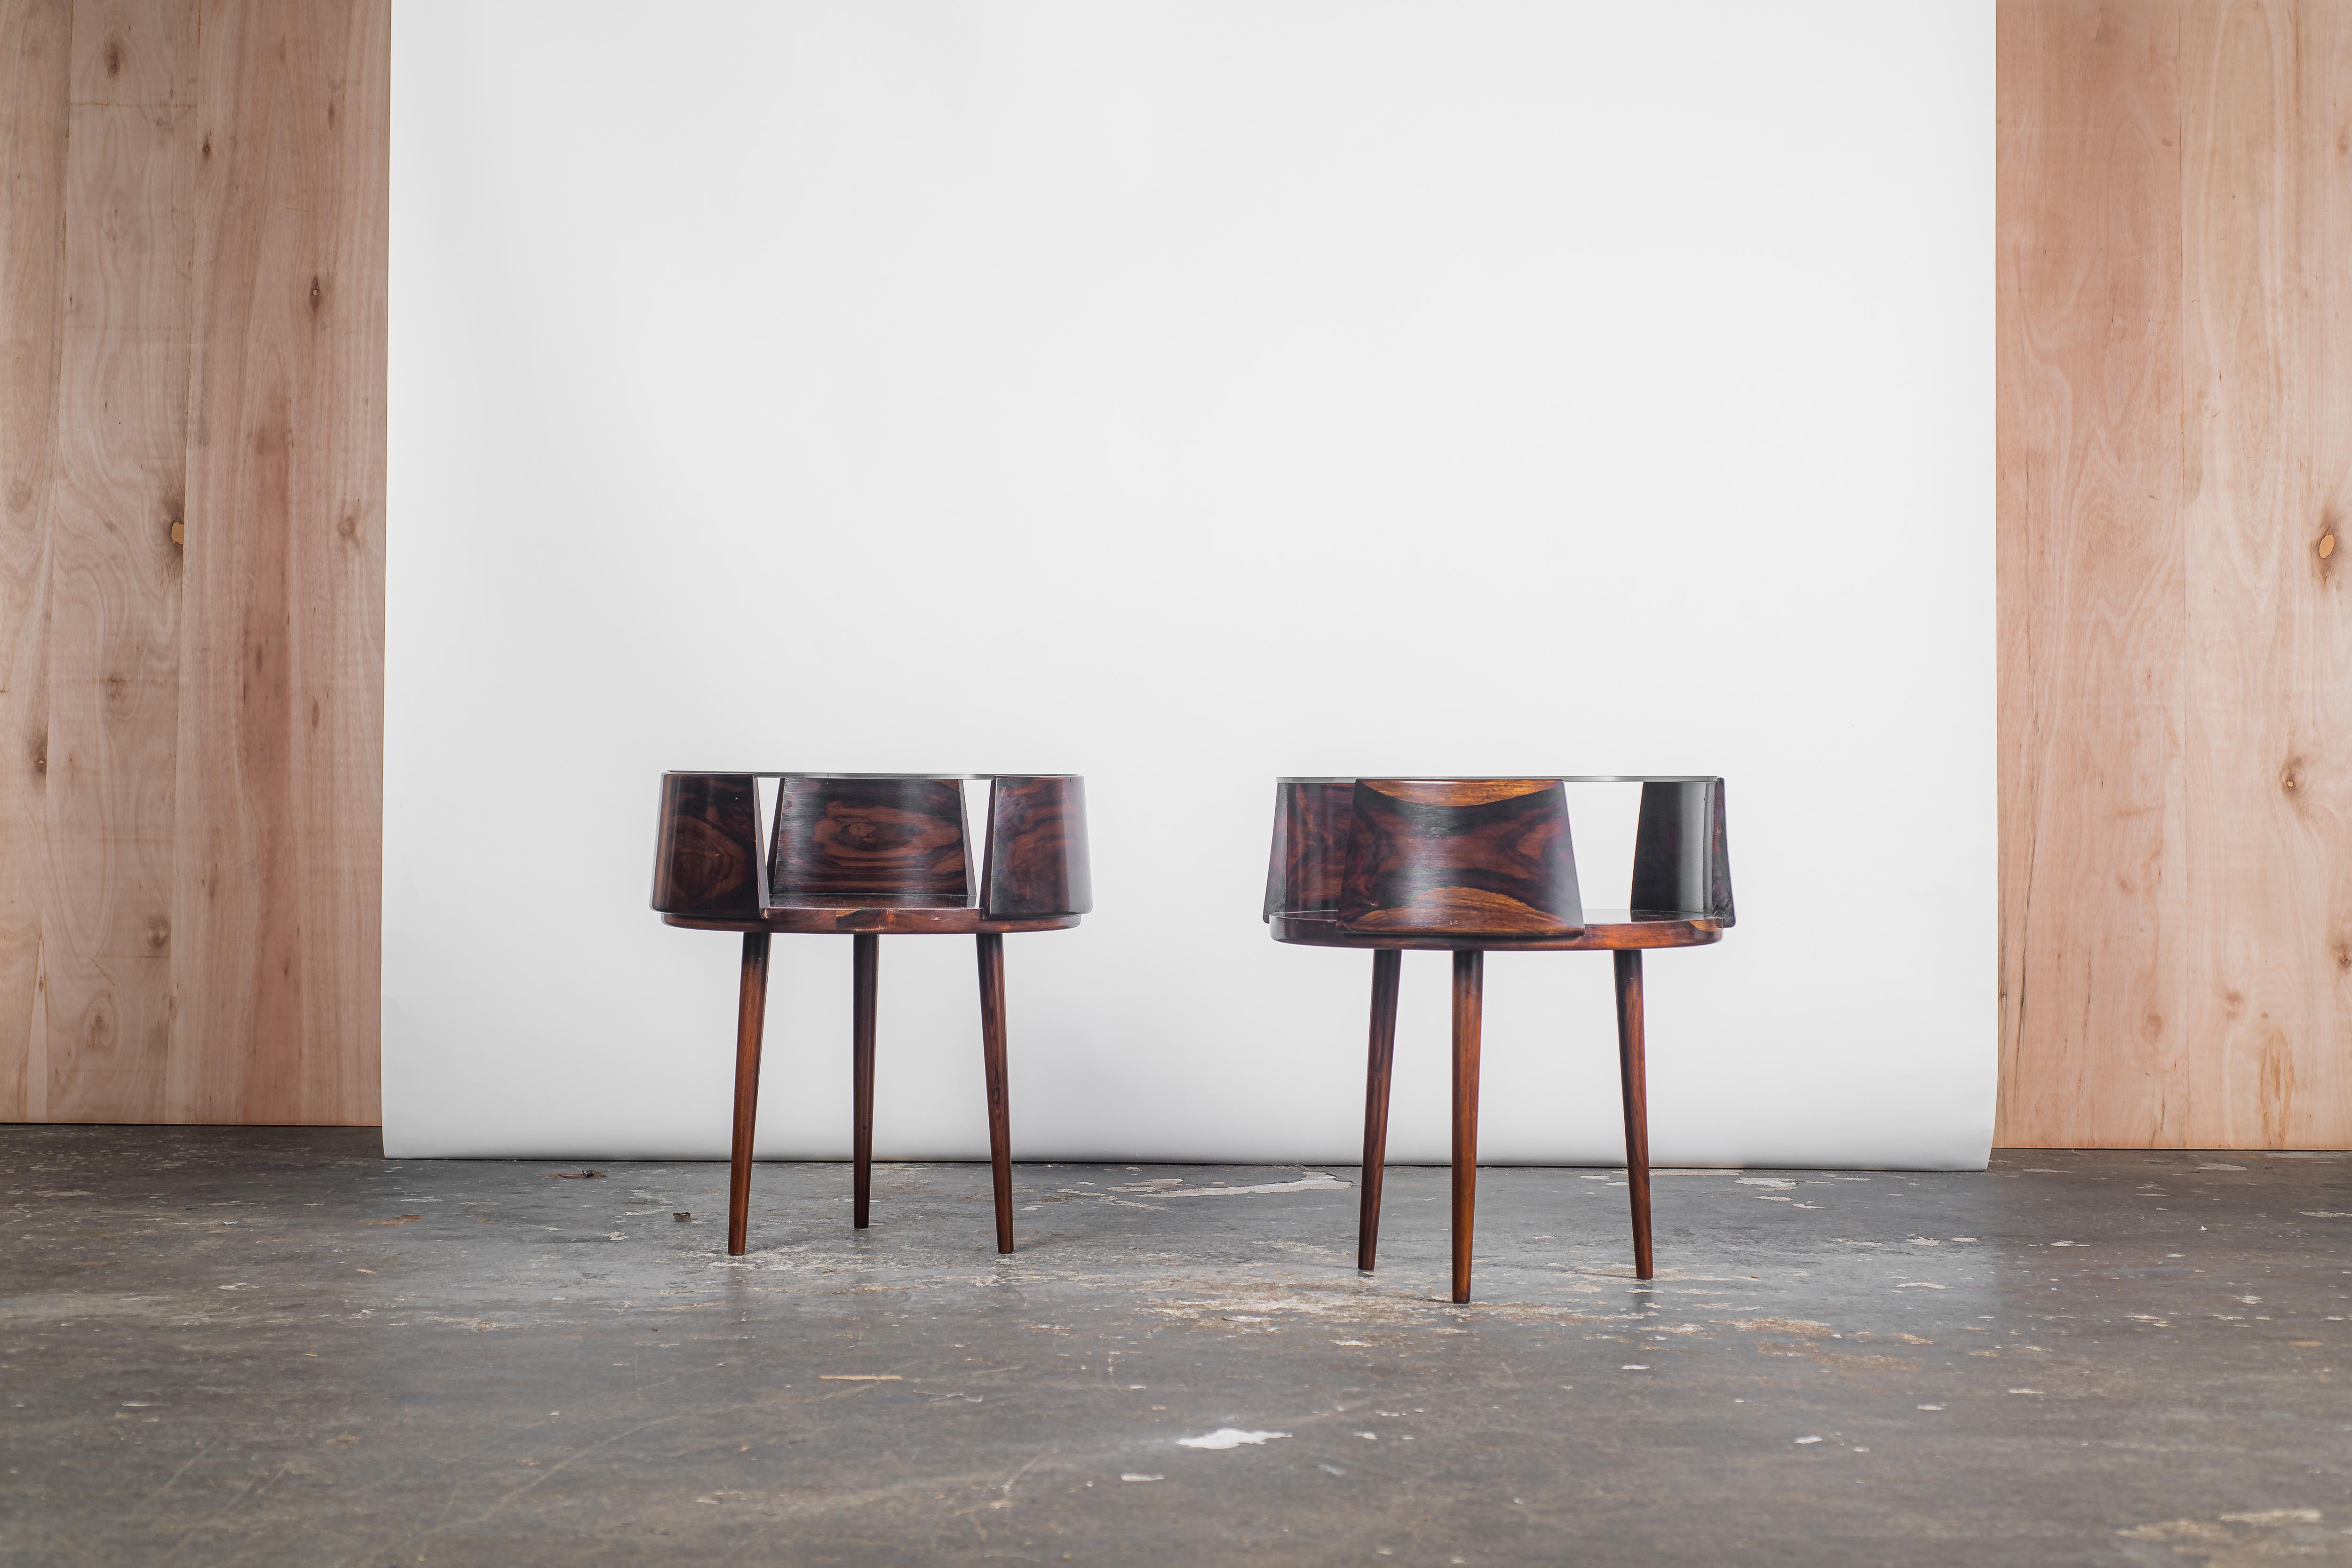 A Masterpiece by Martin Eisler and Susi Aczel

Introducing a remarkable opportunity to acquire these captivating round side tables, expertly designed by the legendary duo Martin Eisler and Susi Aczel for Forma S.A. Móveis e Objetos de Arte.